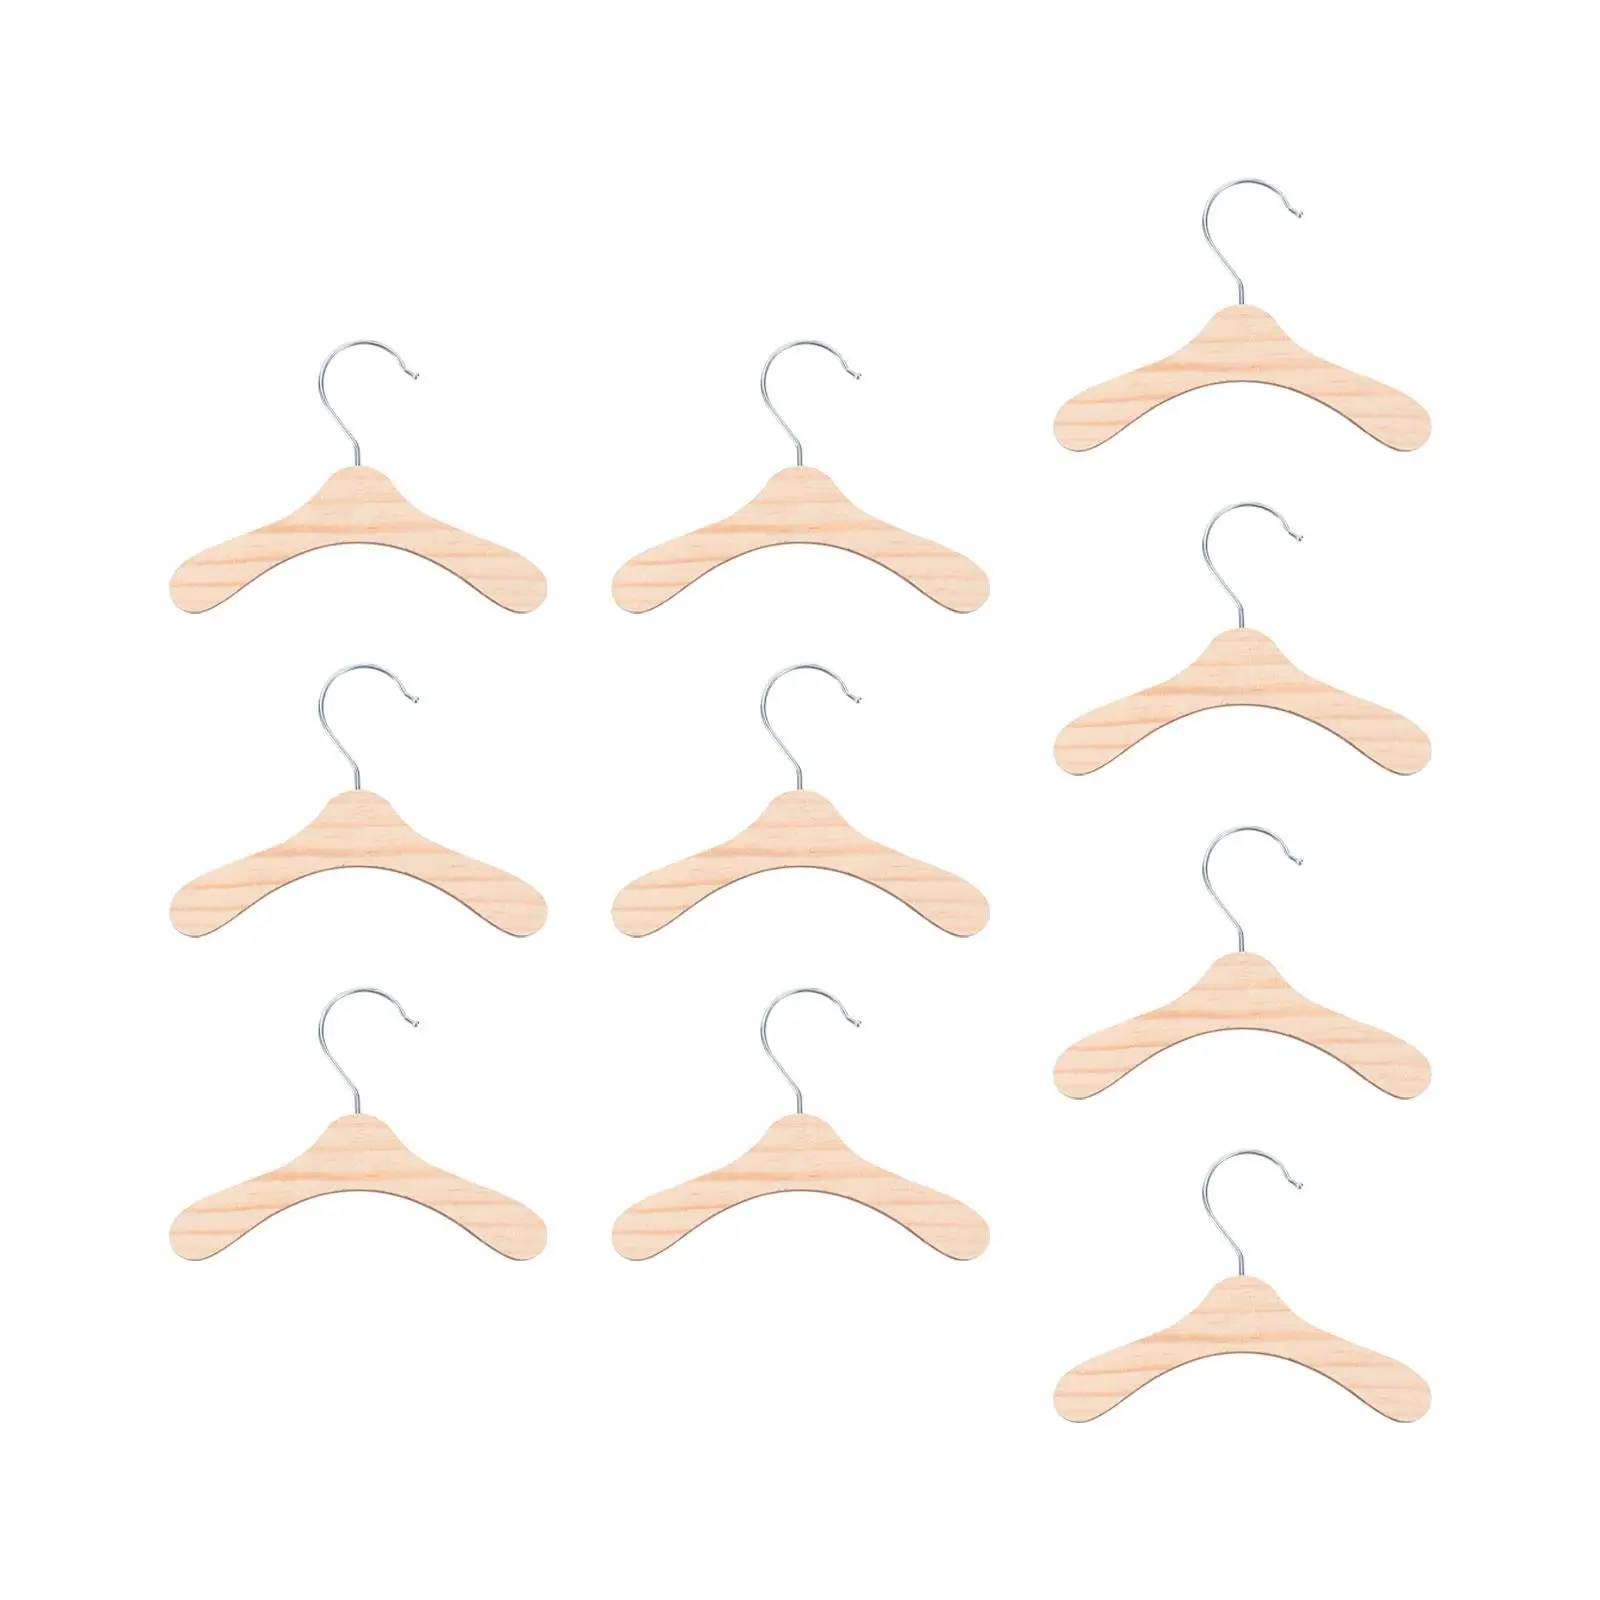 10x Pet Hangers Portable Wood Display Rack Multipurpose Wood Pet Hanger Dog Coat Hanger for Pet Children Doll suits Baby Jewelry